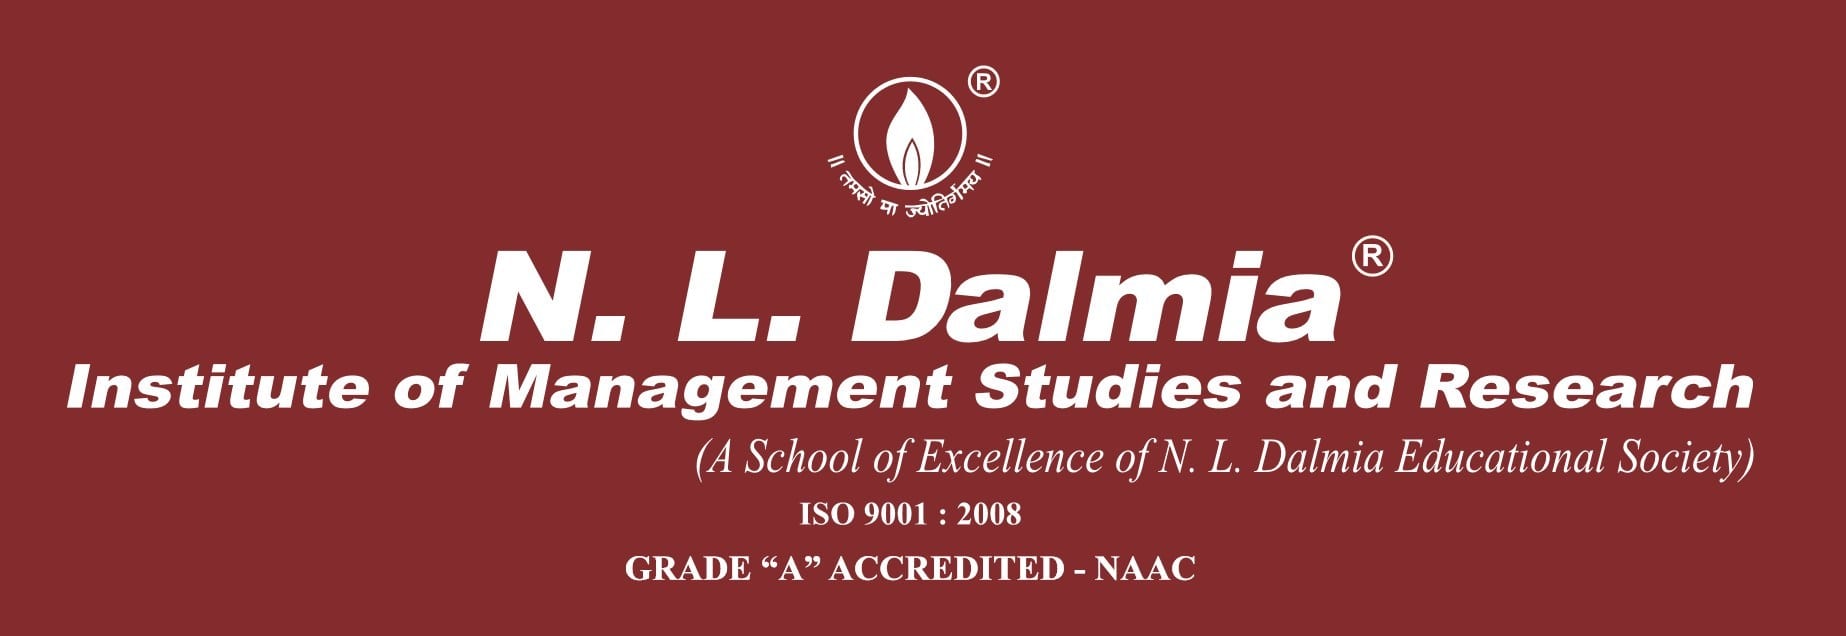 N L Dalmia partners up with the Global Analytics Leader - SAS Institute Pvt. Ltd. for Post Graduate Programs in Big Data and Advanced Analytics